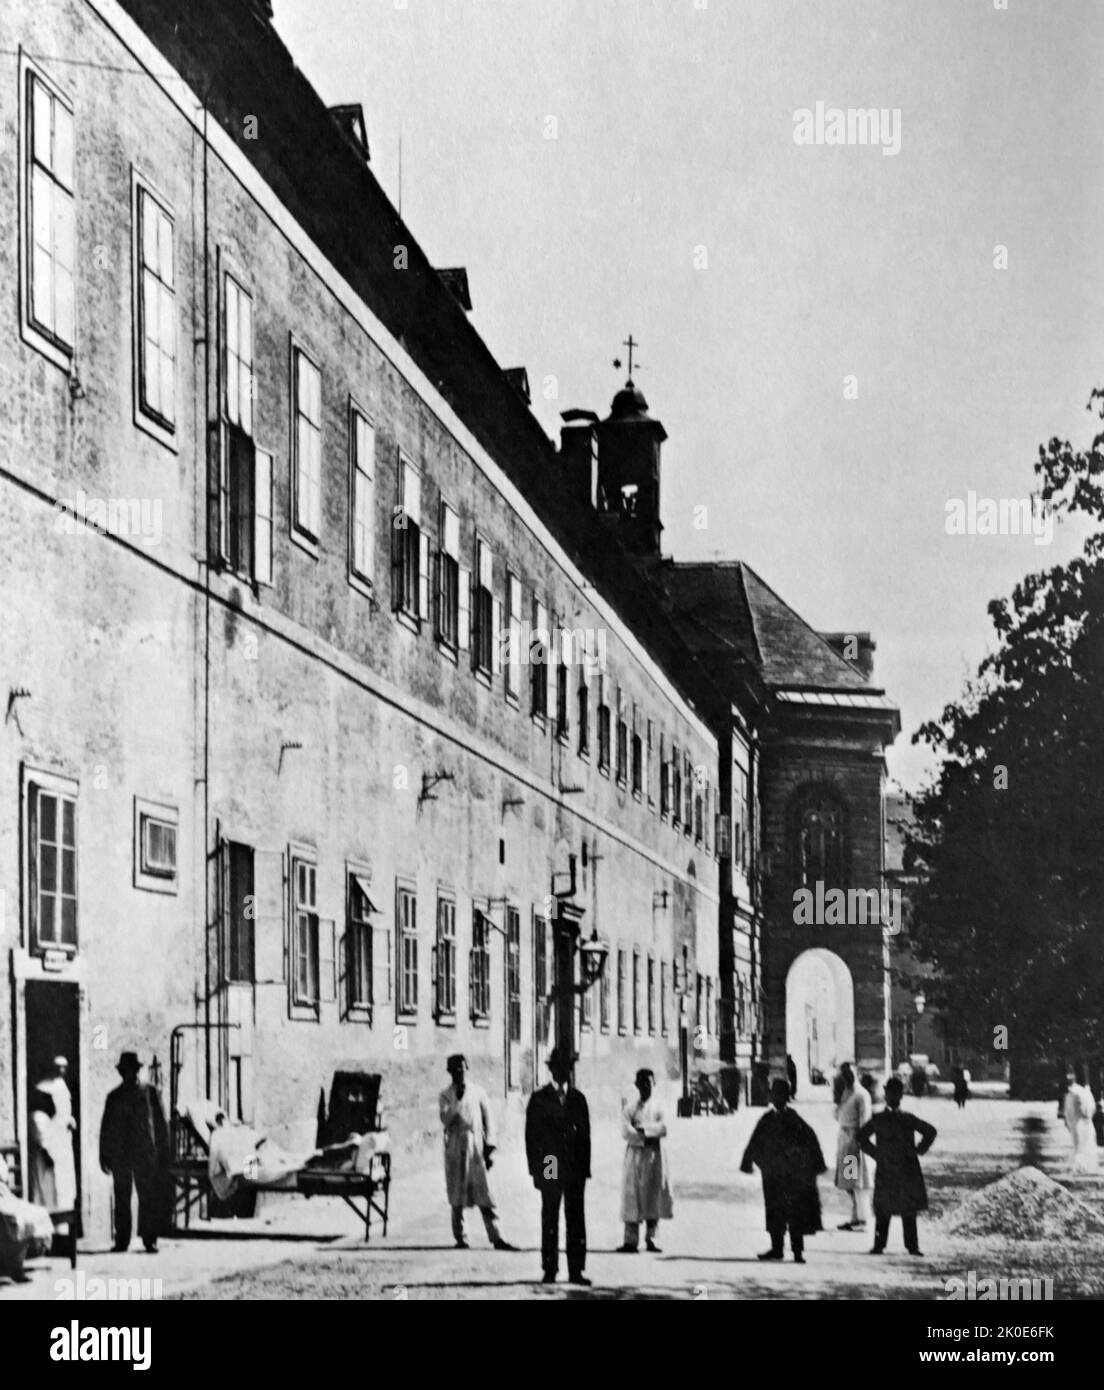 Psychiatric ward of the Vienna General Hospital, where Sigmund Freud was a doctor. 1900. Sigmund Freud (6 May 1856 - 23 September 1939) was an Austrian neurologist and the founder of psychoanalysis, a clinical method for treating psychopathology through dialogue between a patient and a psychoanalyst. Stock Photo